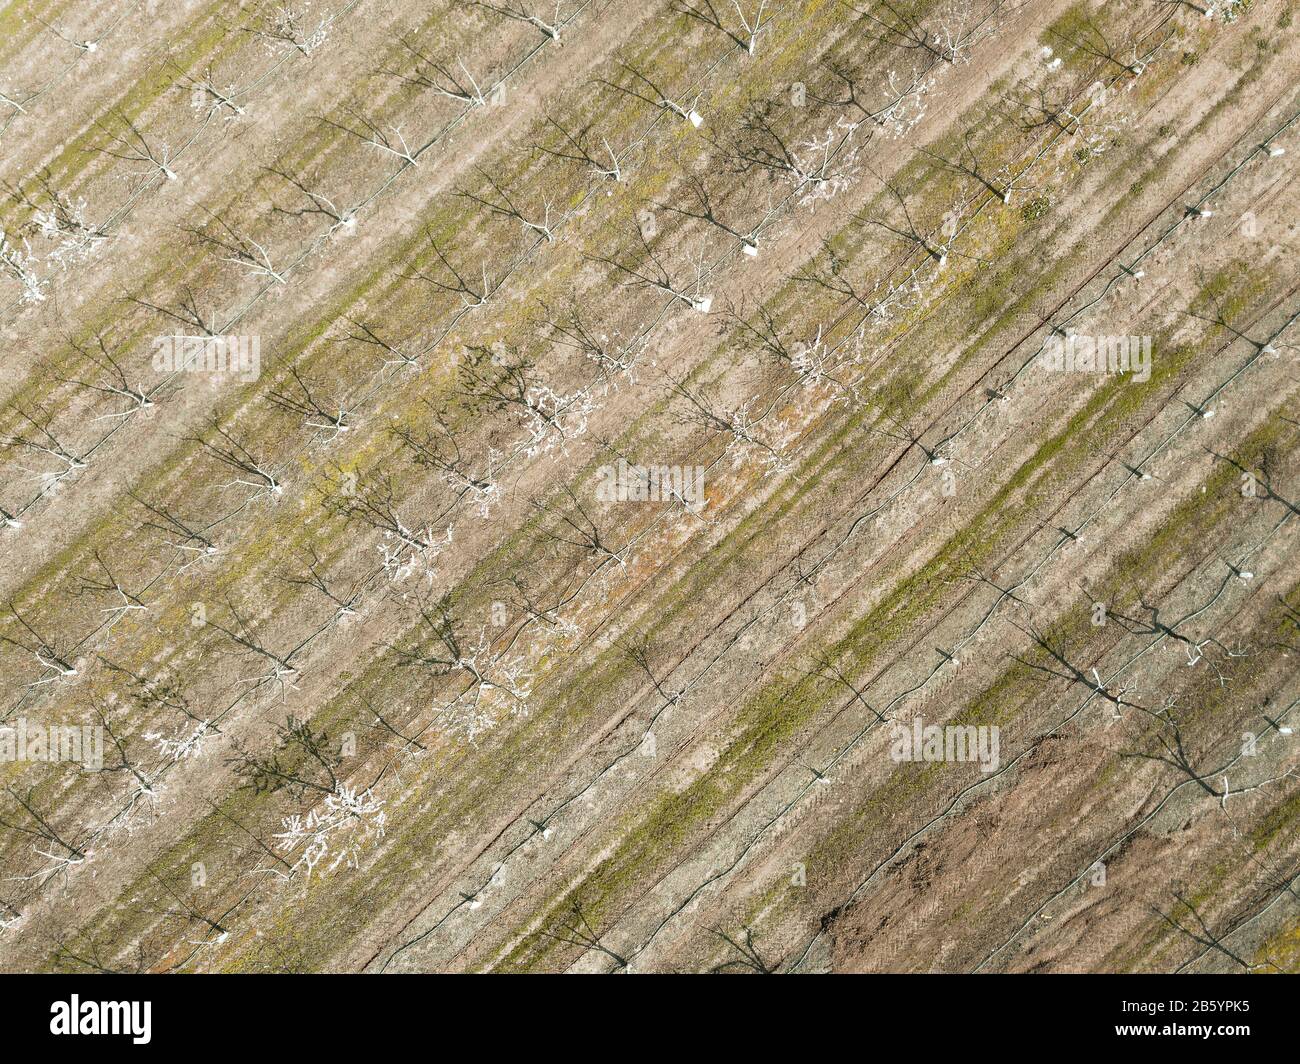 Drone aerial shot of cherry tree cultivation in a fruit farm. Agriculture background. Stock Photo